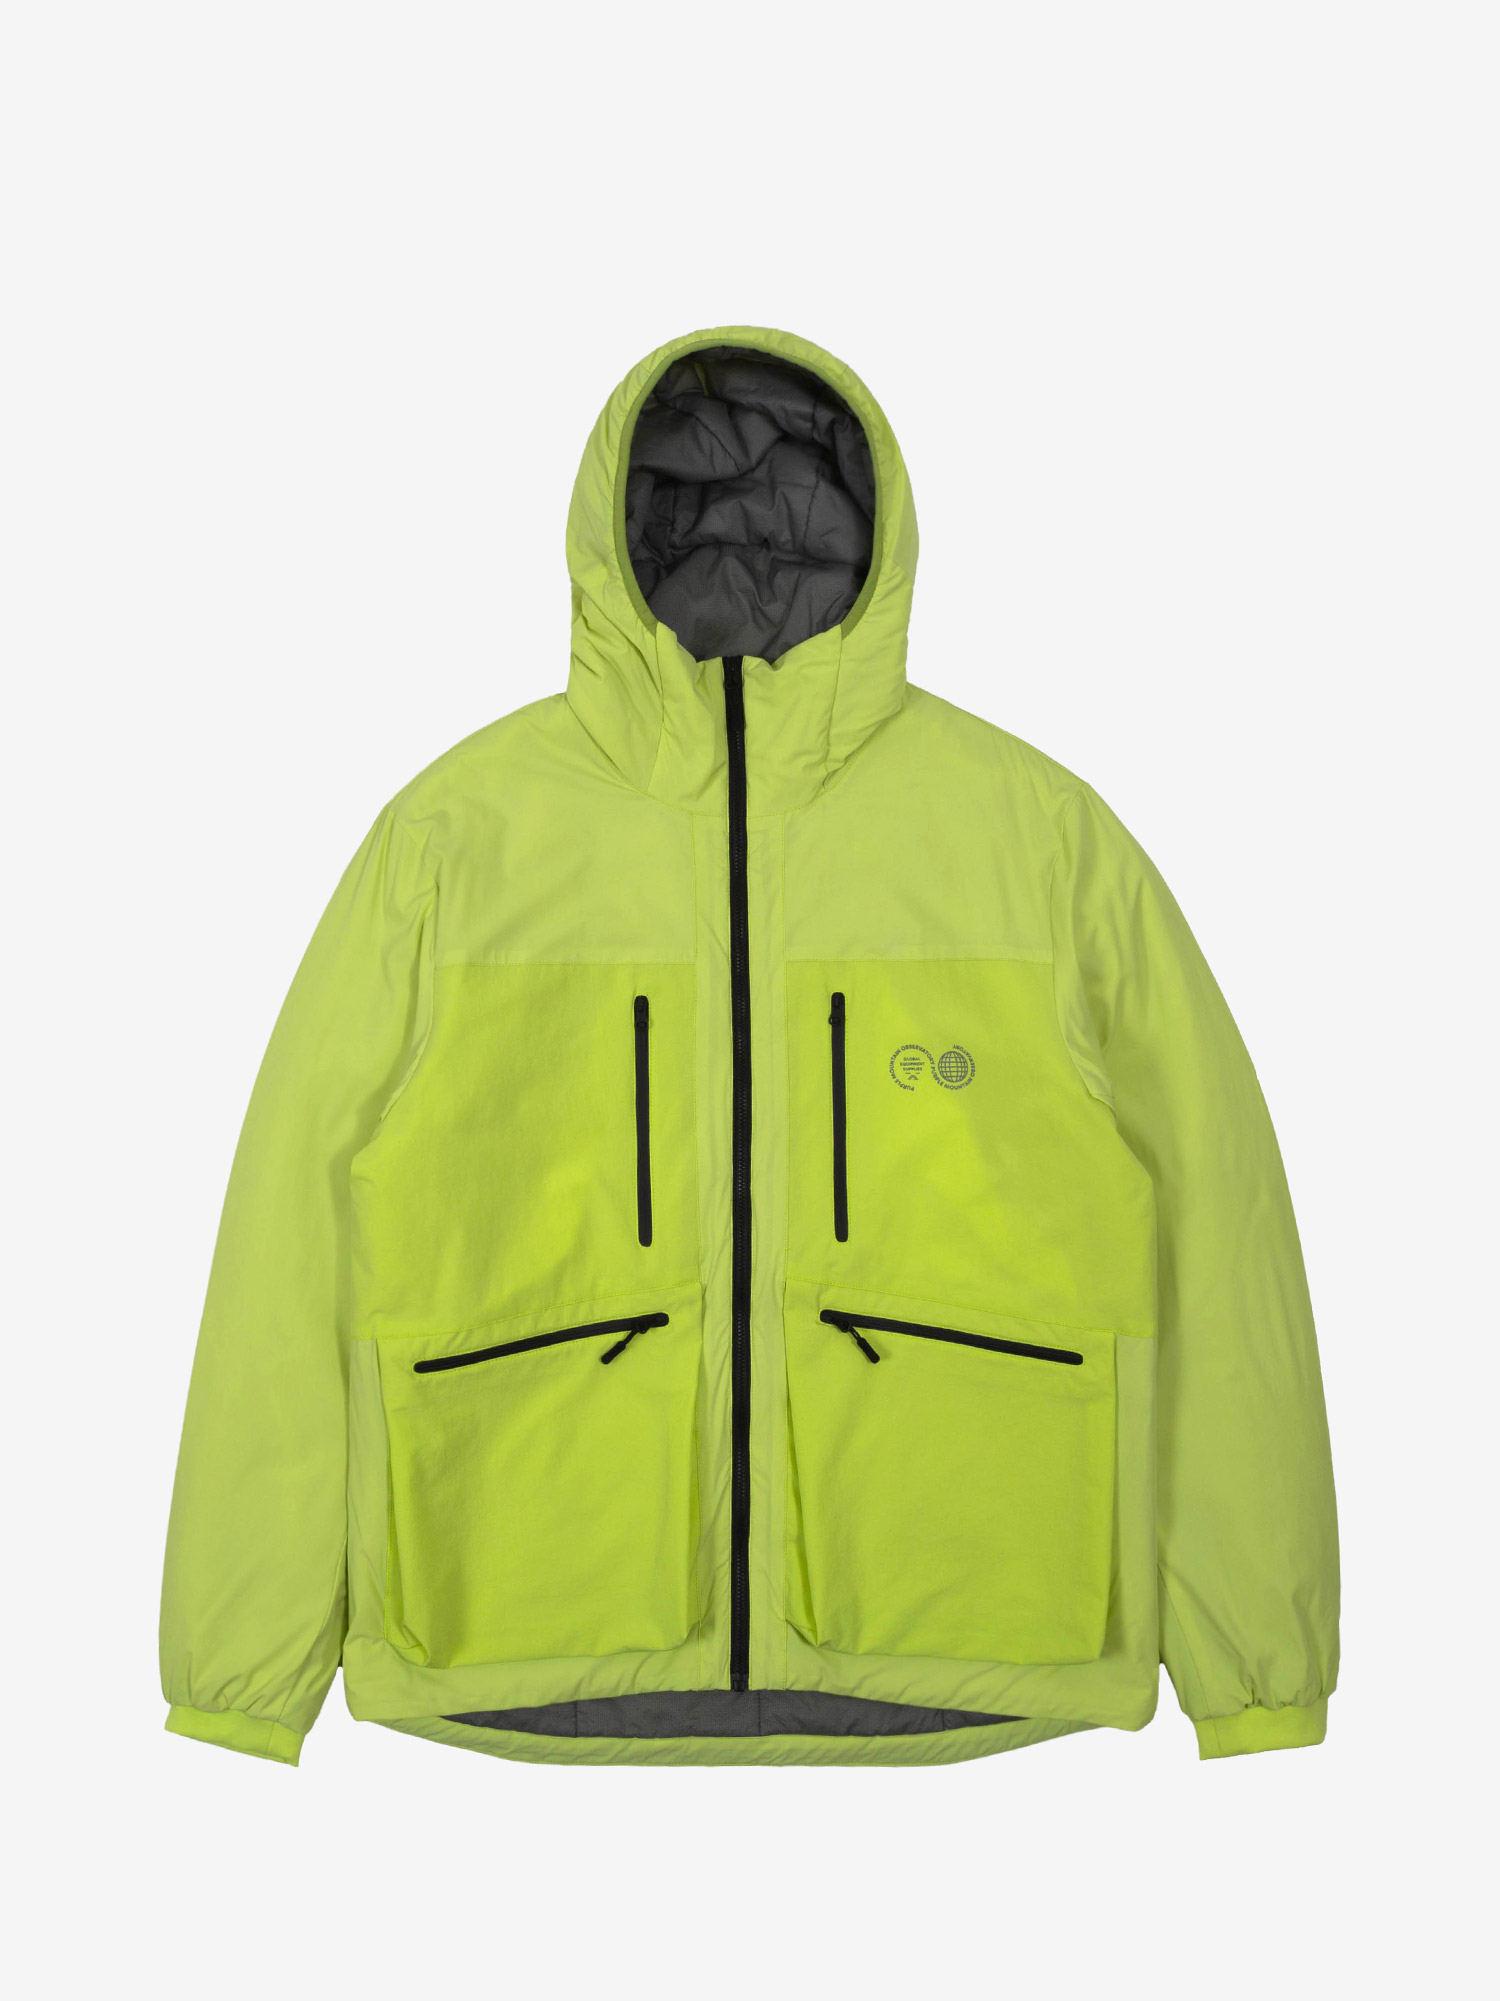 Featured image for “WATER REPELLENT JACKET IN LIME”